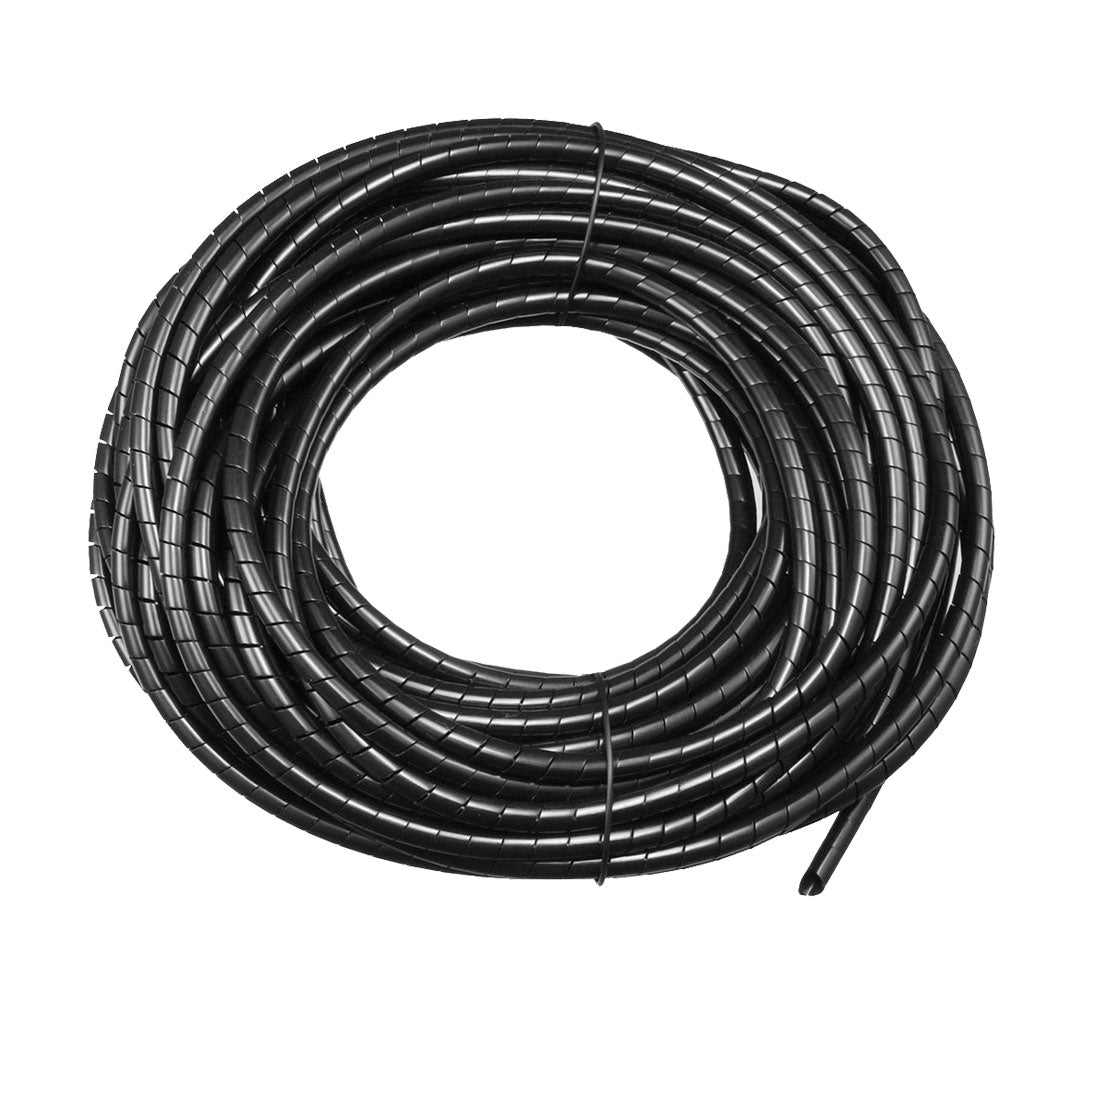 uxcell Uxcell 3mm Flexible Spiral Tube Cable Wire Wrap Manage Cord 19M Length Black